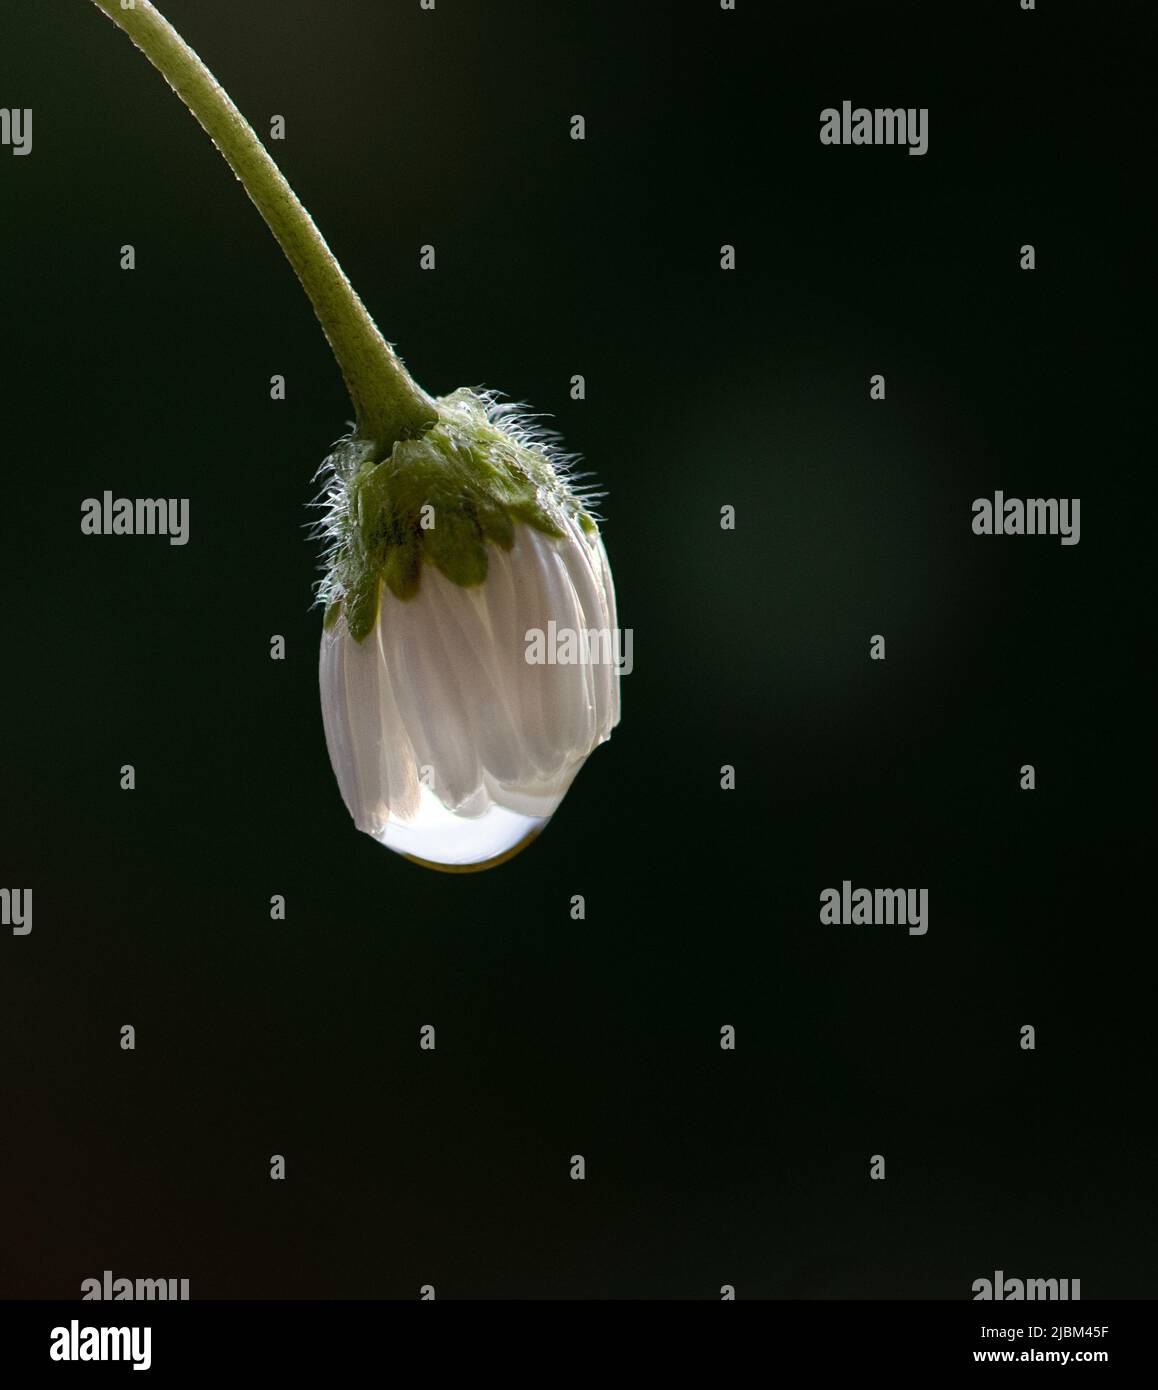 Artistic photo of nice white blooming flower isolated in darkbackground, natural light, central focus, artistic concept Stock Photo